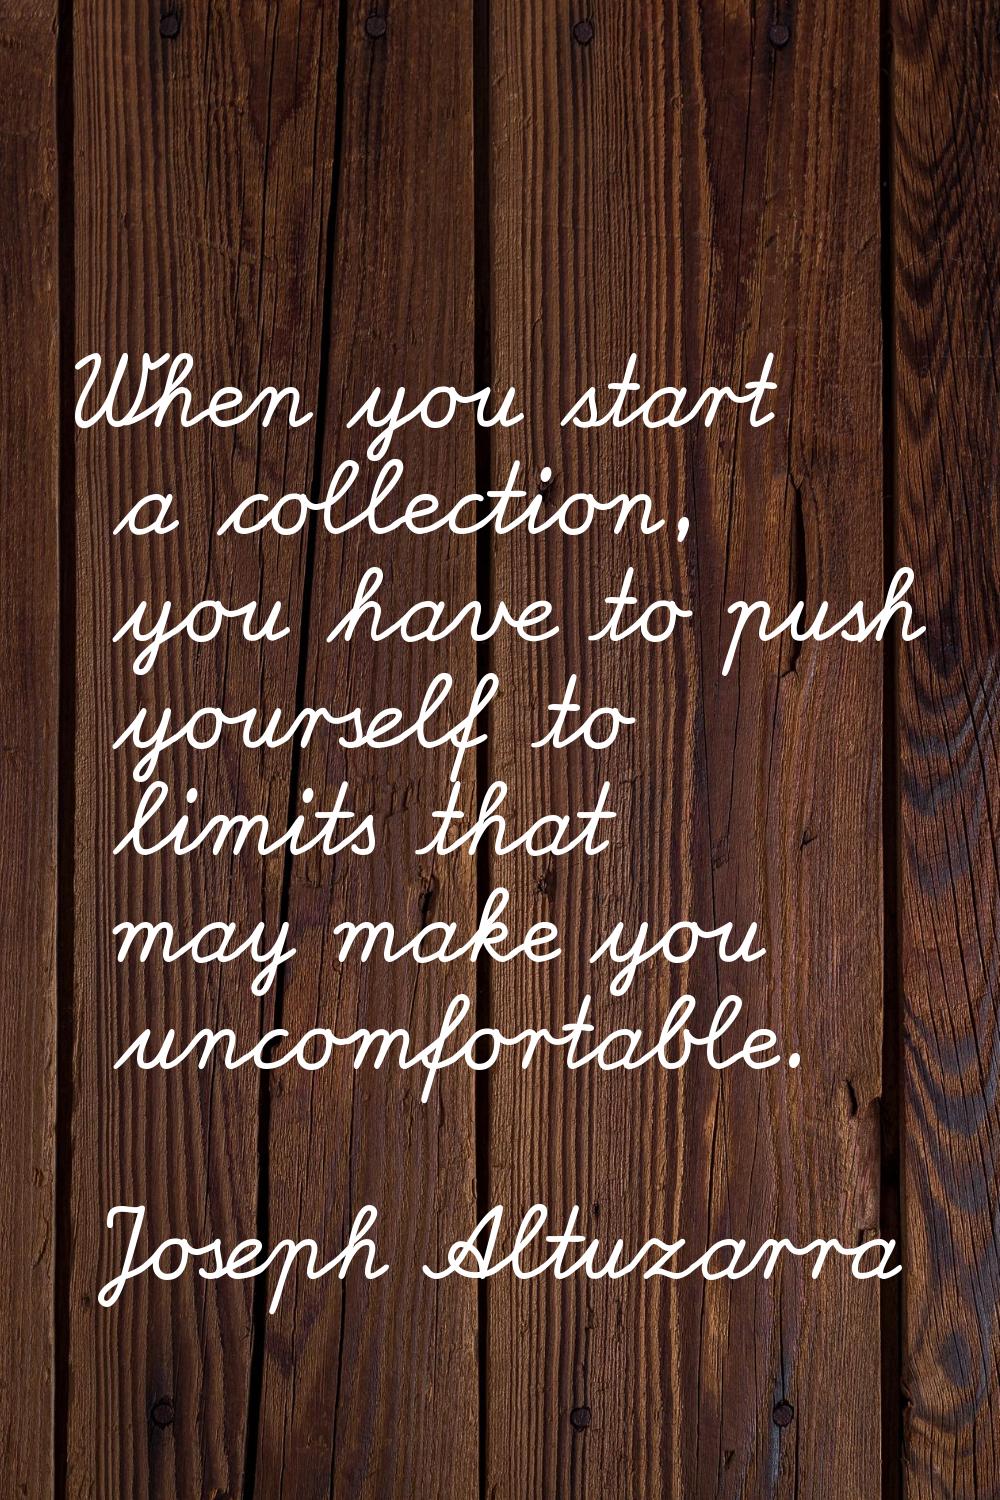 When you start a collection, you have to push yourself to limits that may make you uncomfortable.